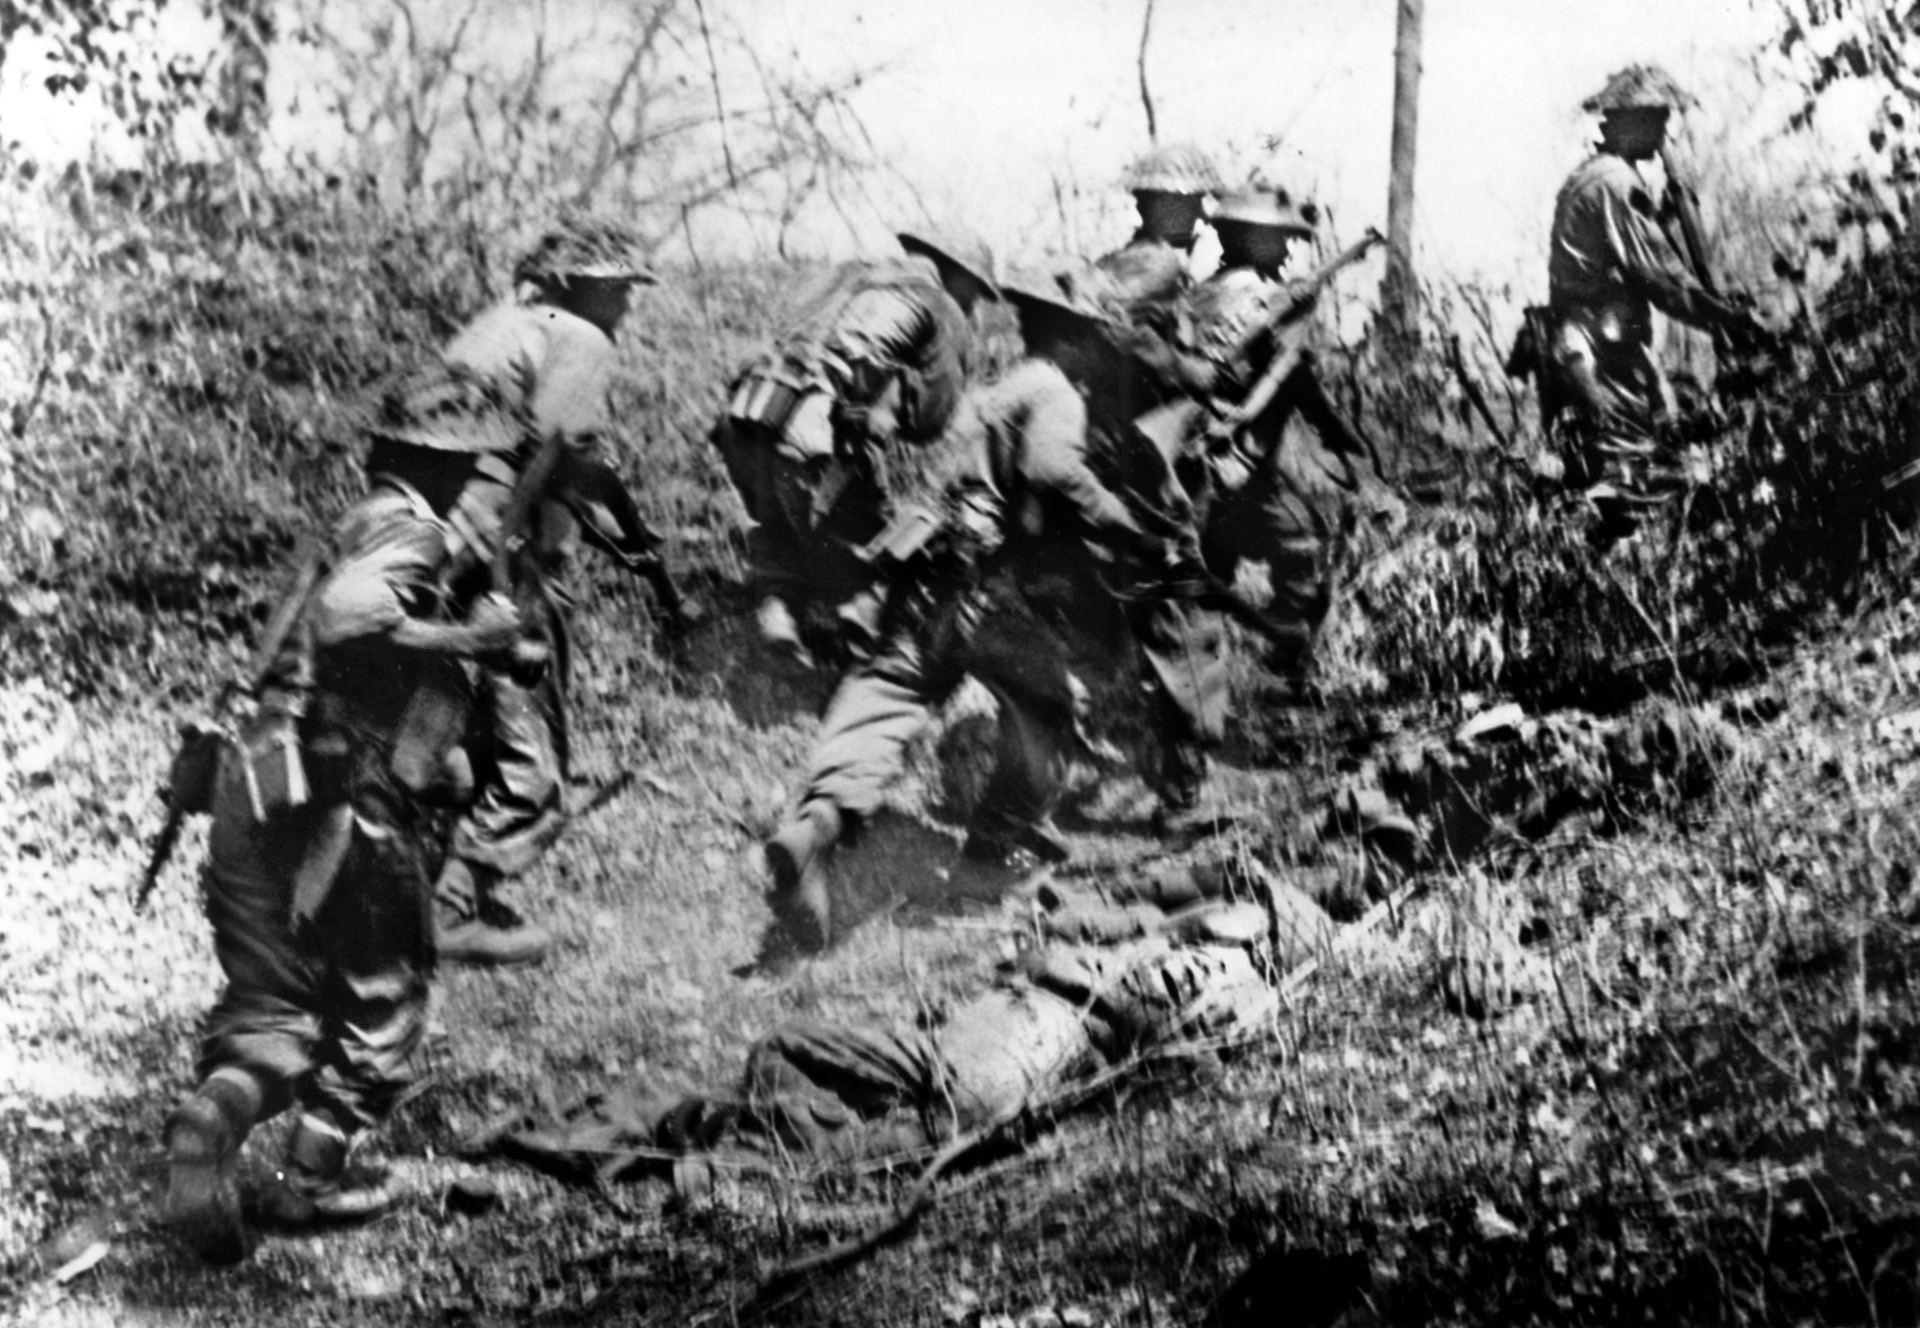 Swiftly pressing their advantage, British soldiers rush past the body of a dead Japanese soldier during the advance on Meiktila in the spring of 1945. The capture of Meiktila, a vital communications center, severed links between Japanese troops and Rangoon.